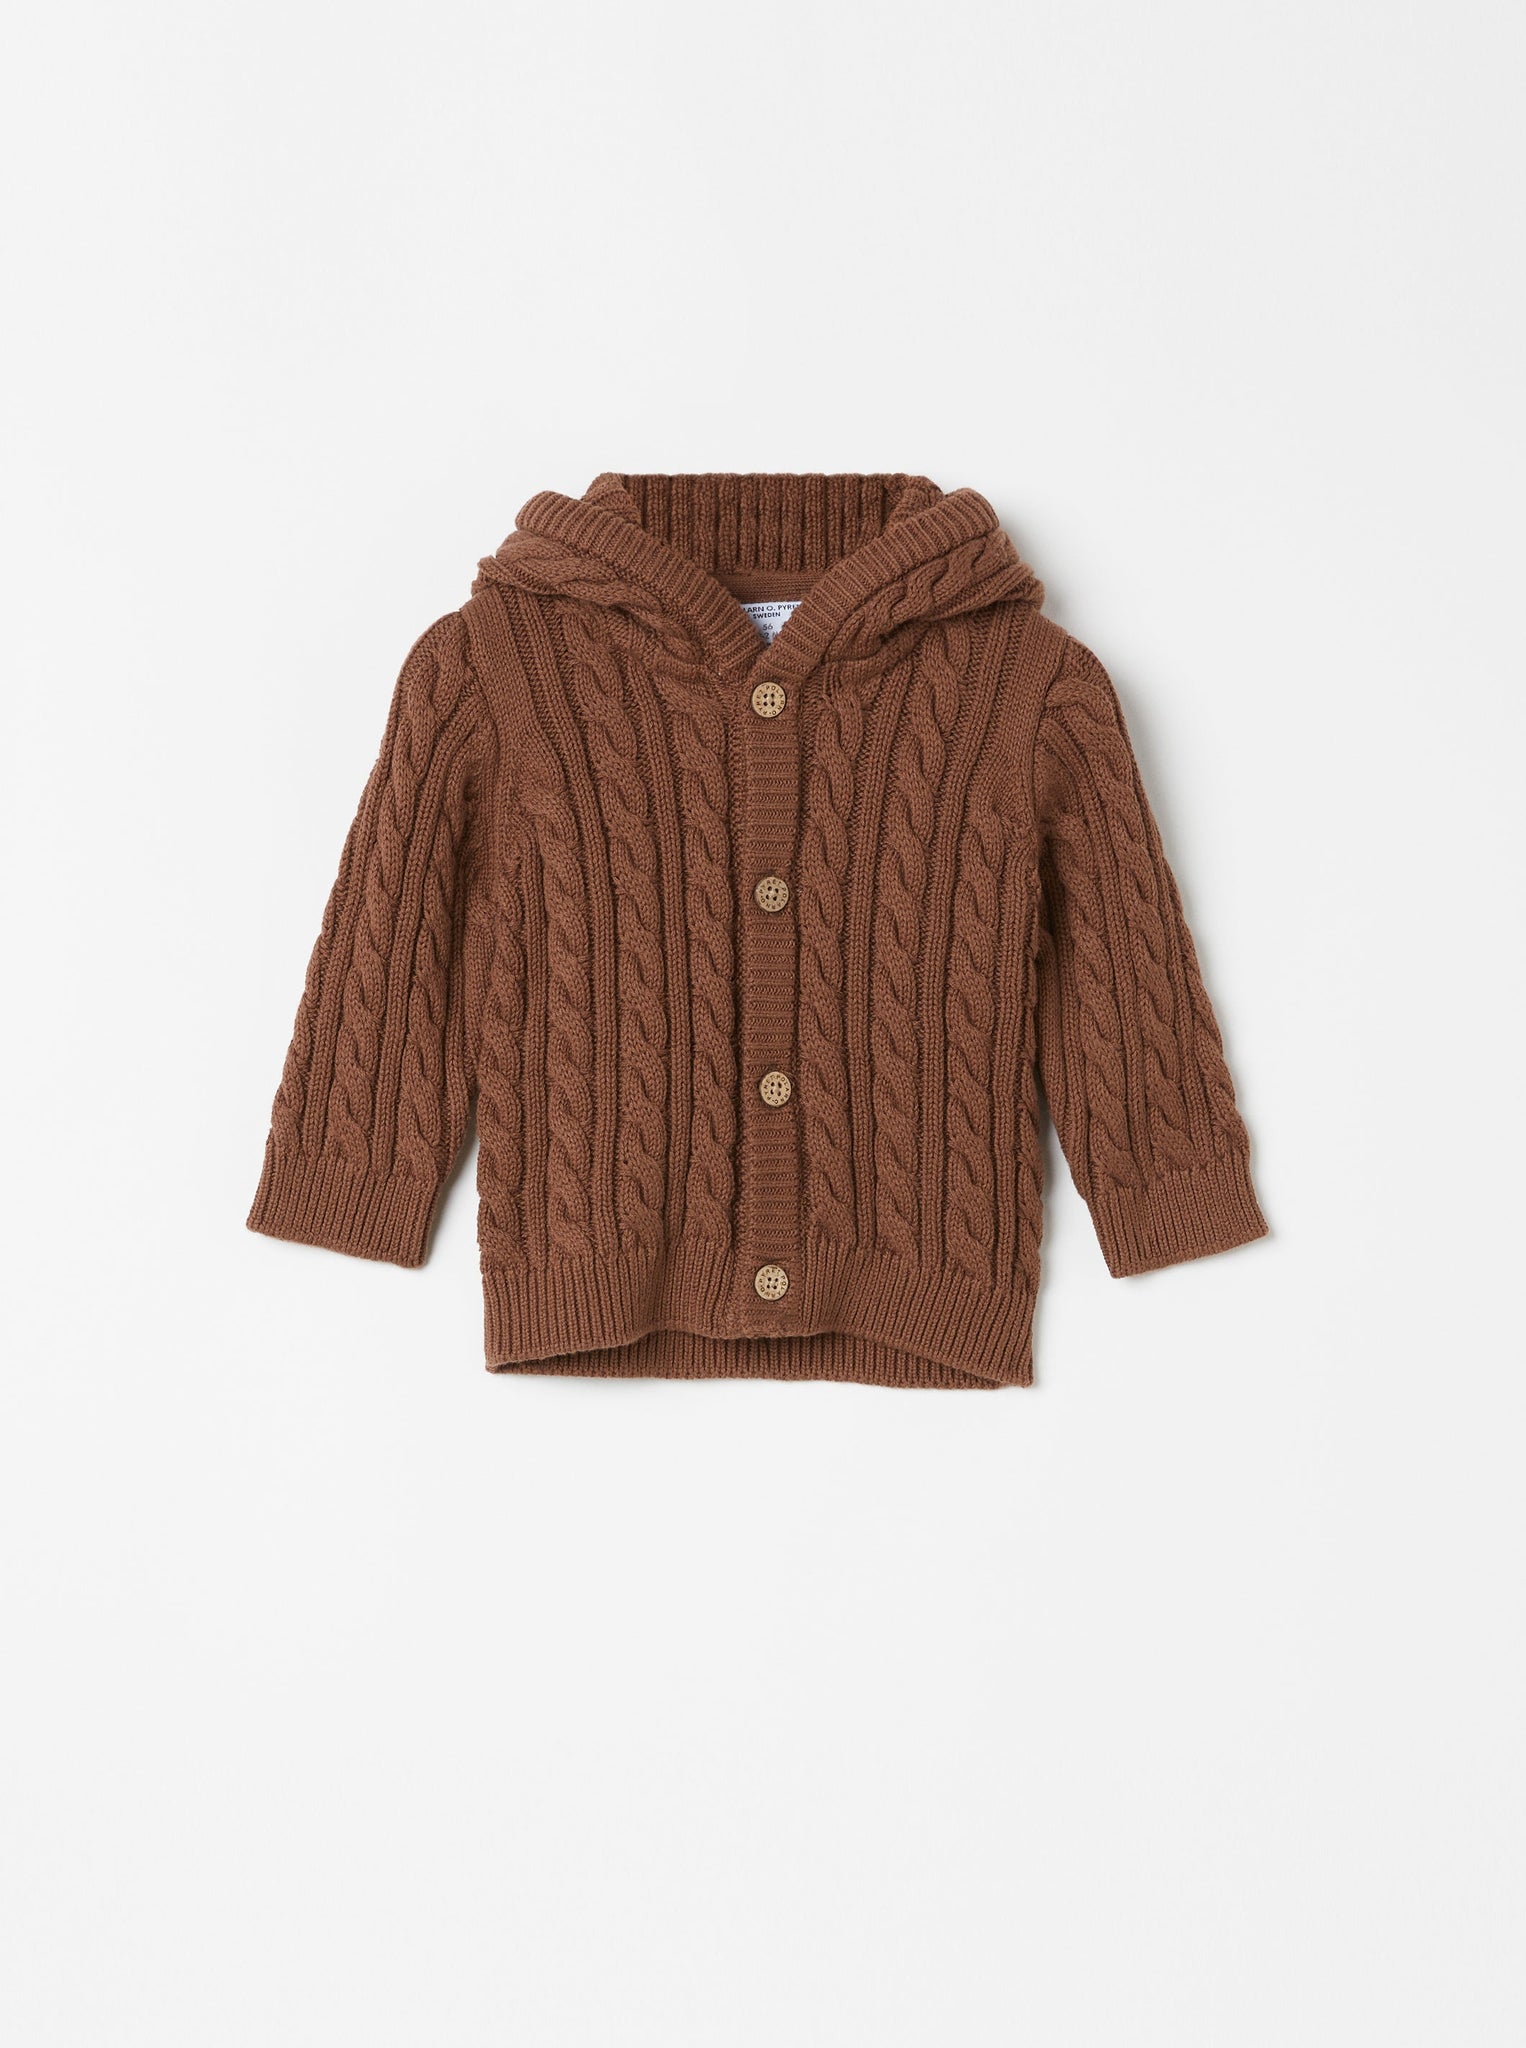 Organic Cotton Knitted Baby Cardigan from the Polarn O. Pyret Kidswear collection. Clothes made using sustainably sourced materials.